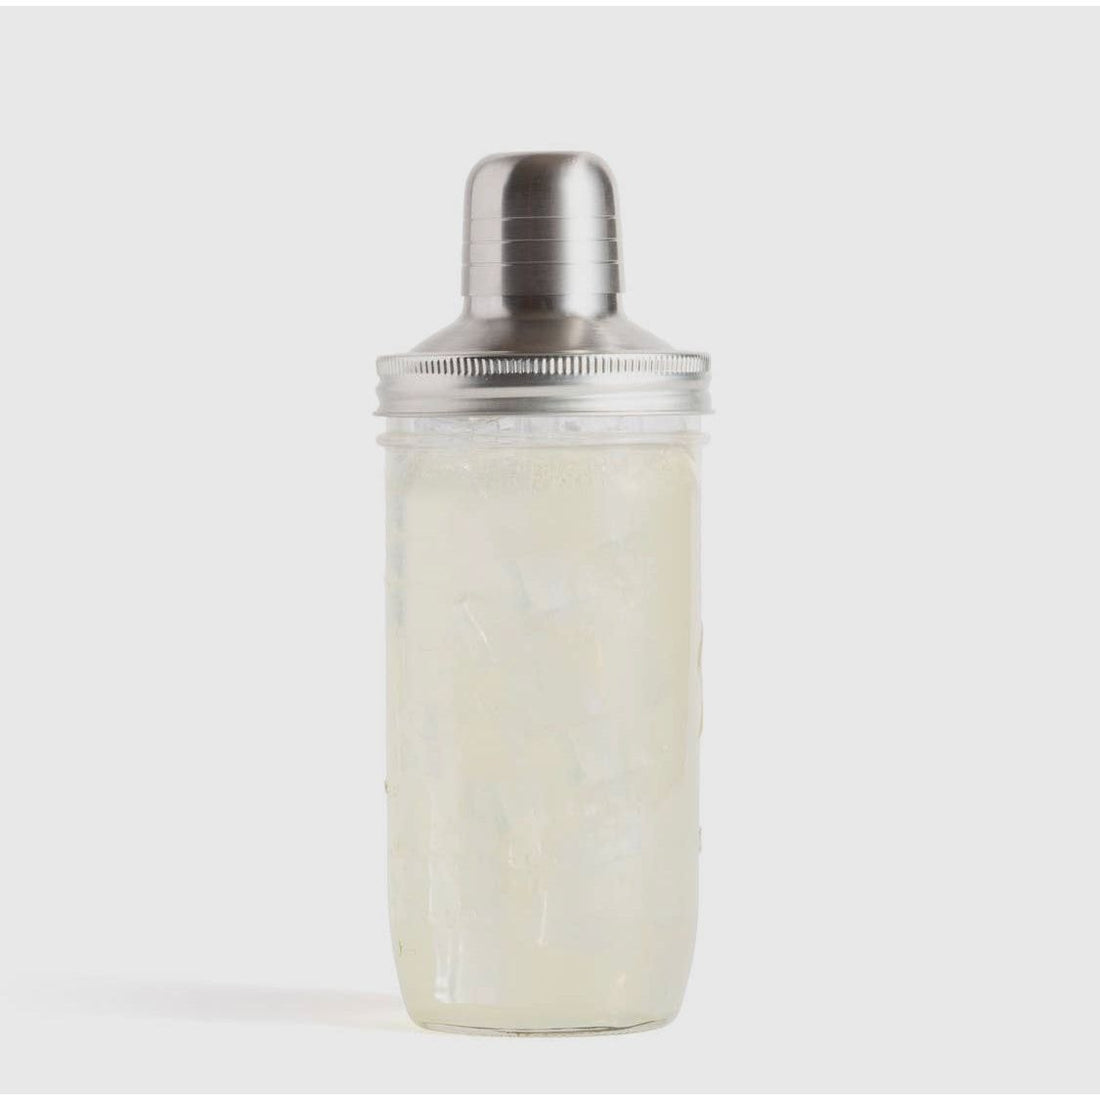 Jar Top Cocktail Shaker - wide mouth